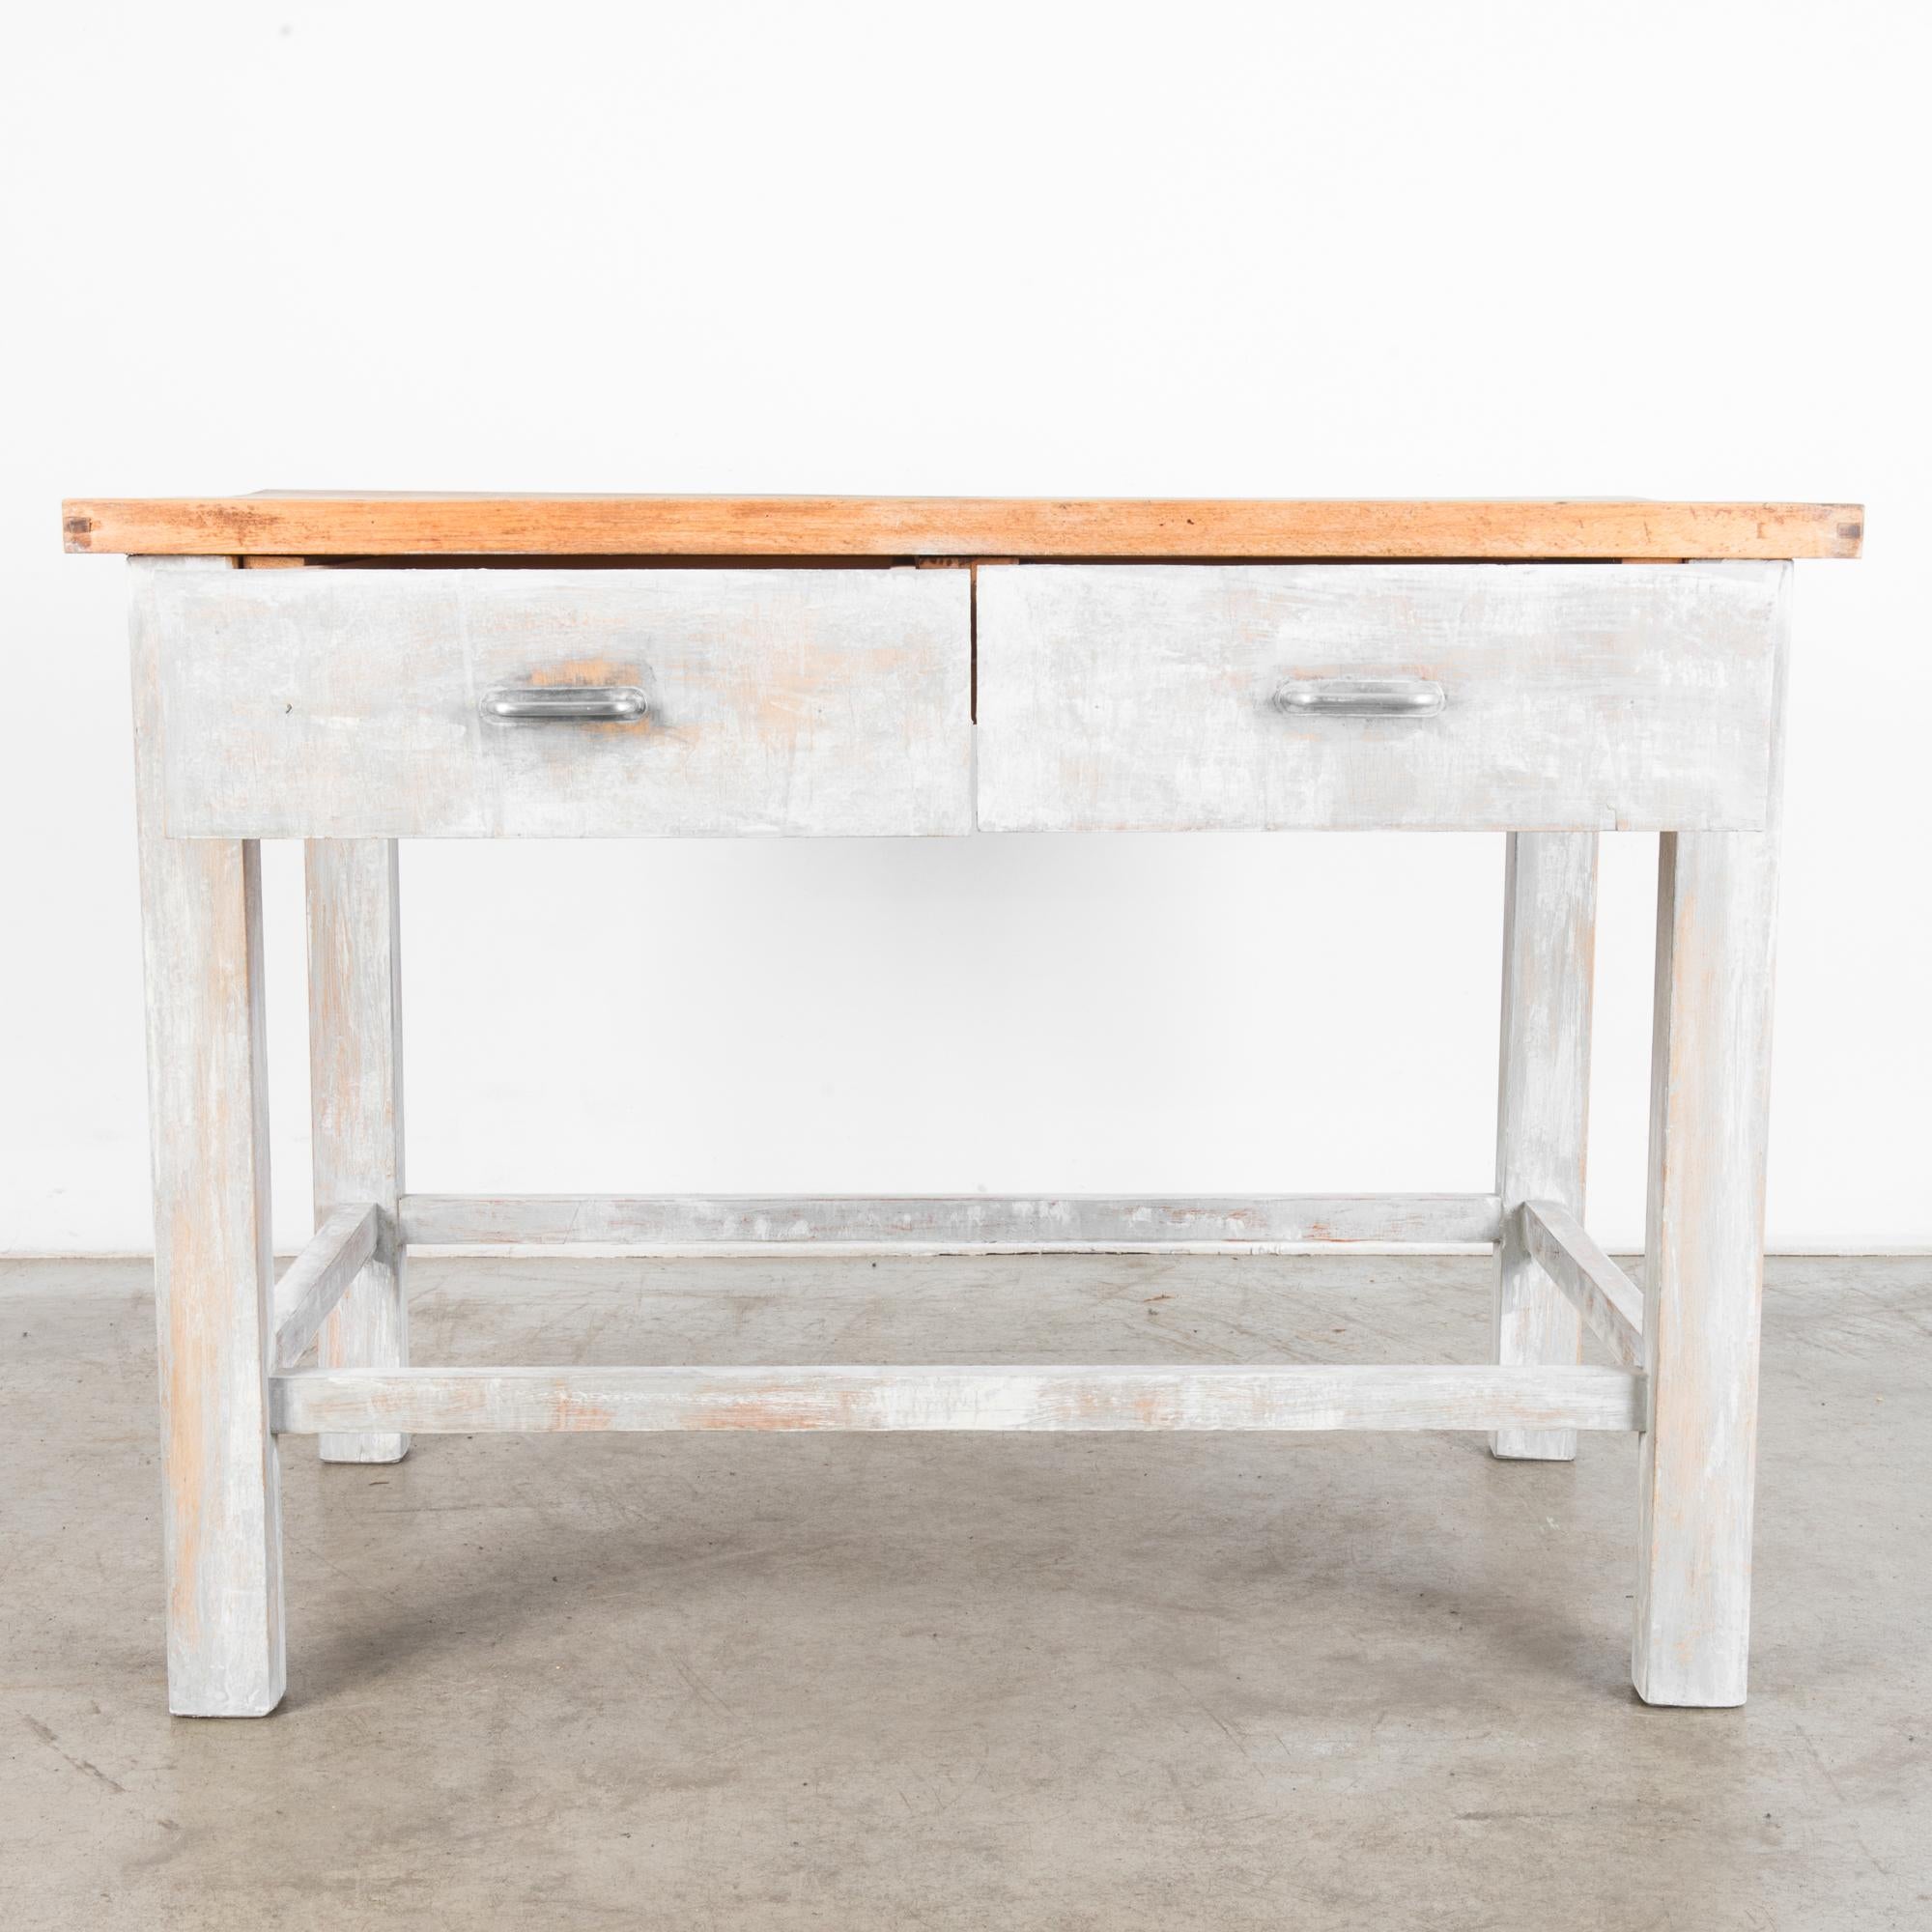 A wood patinated table from Czechia, produced, circa 1950. A sturdy table with a thick tabletop and two drawers straight from a mid-century workshop. A muted palette and unencumbered design allow this piece to function in most any environment.